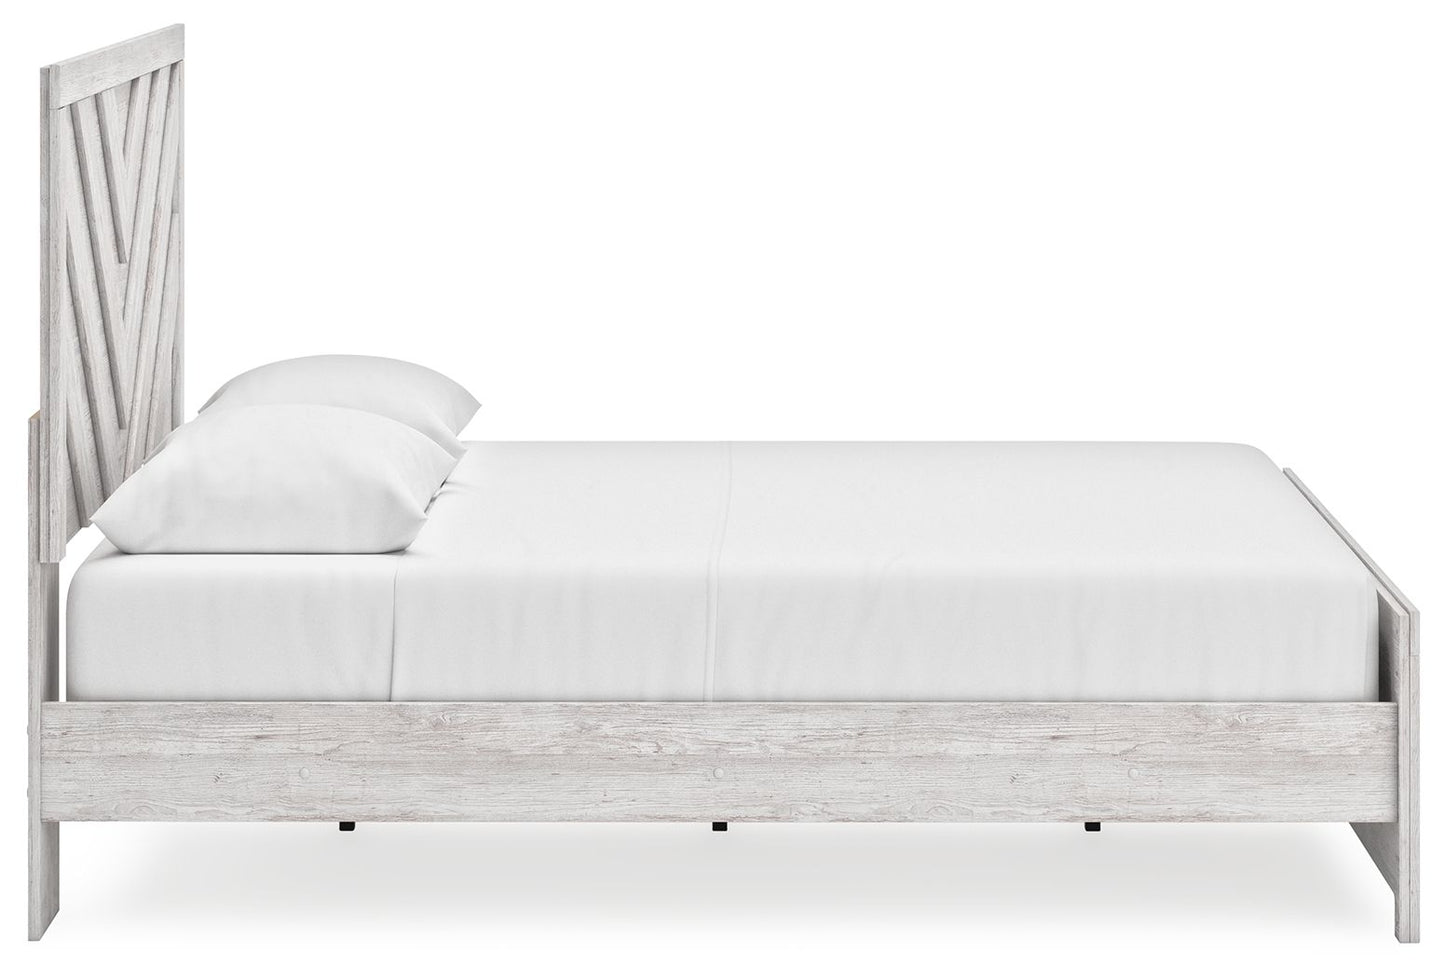 Cayboni - Whitewash - Queen Panel Bed